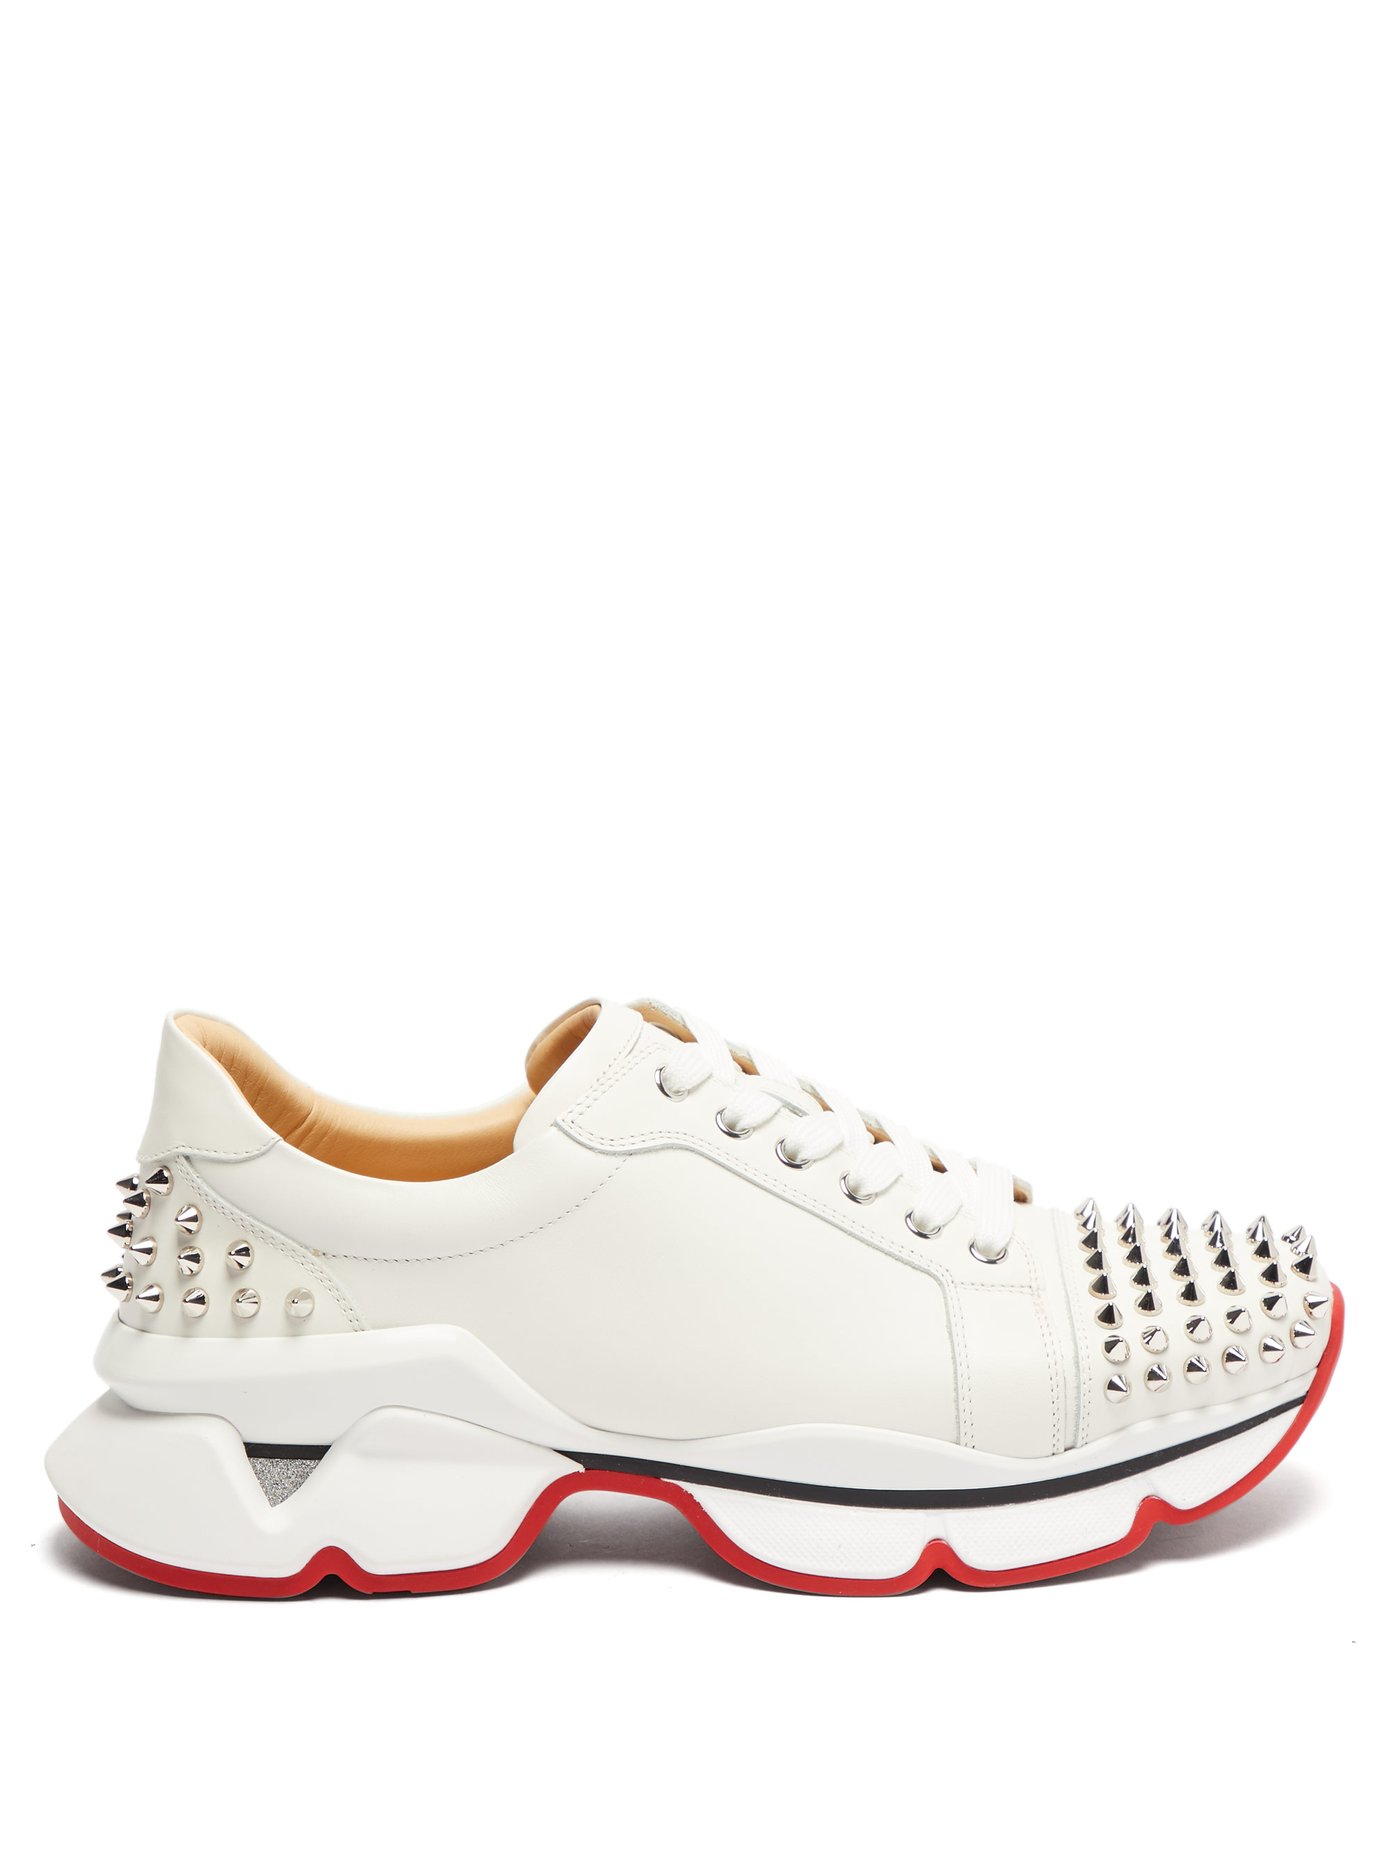 louboutin white studded sneakers